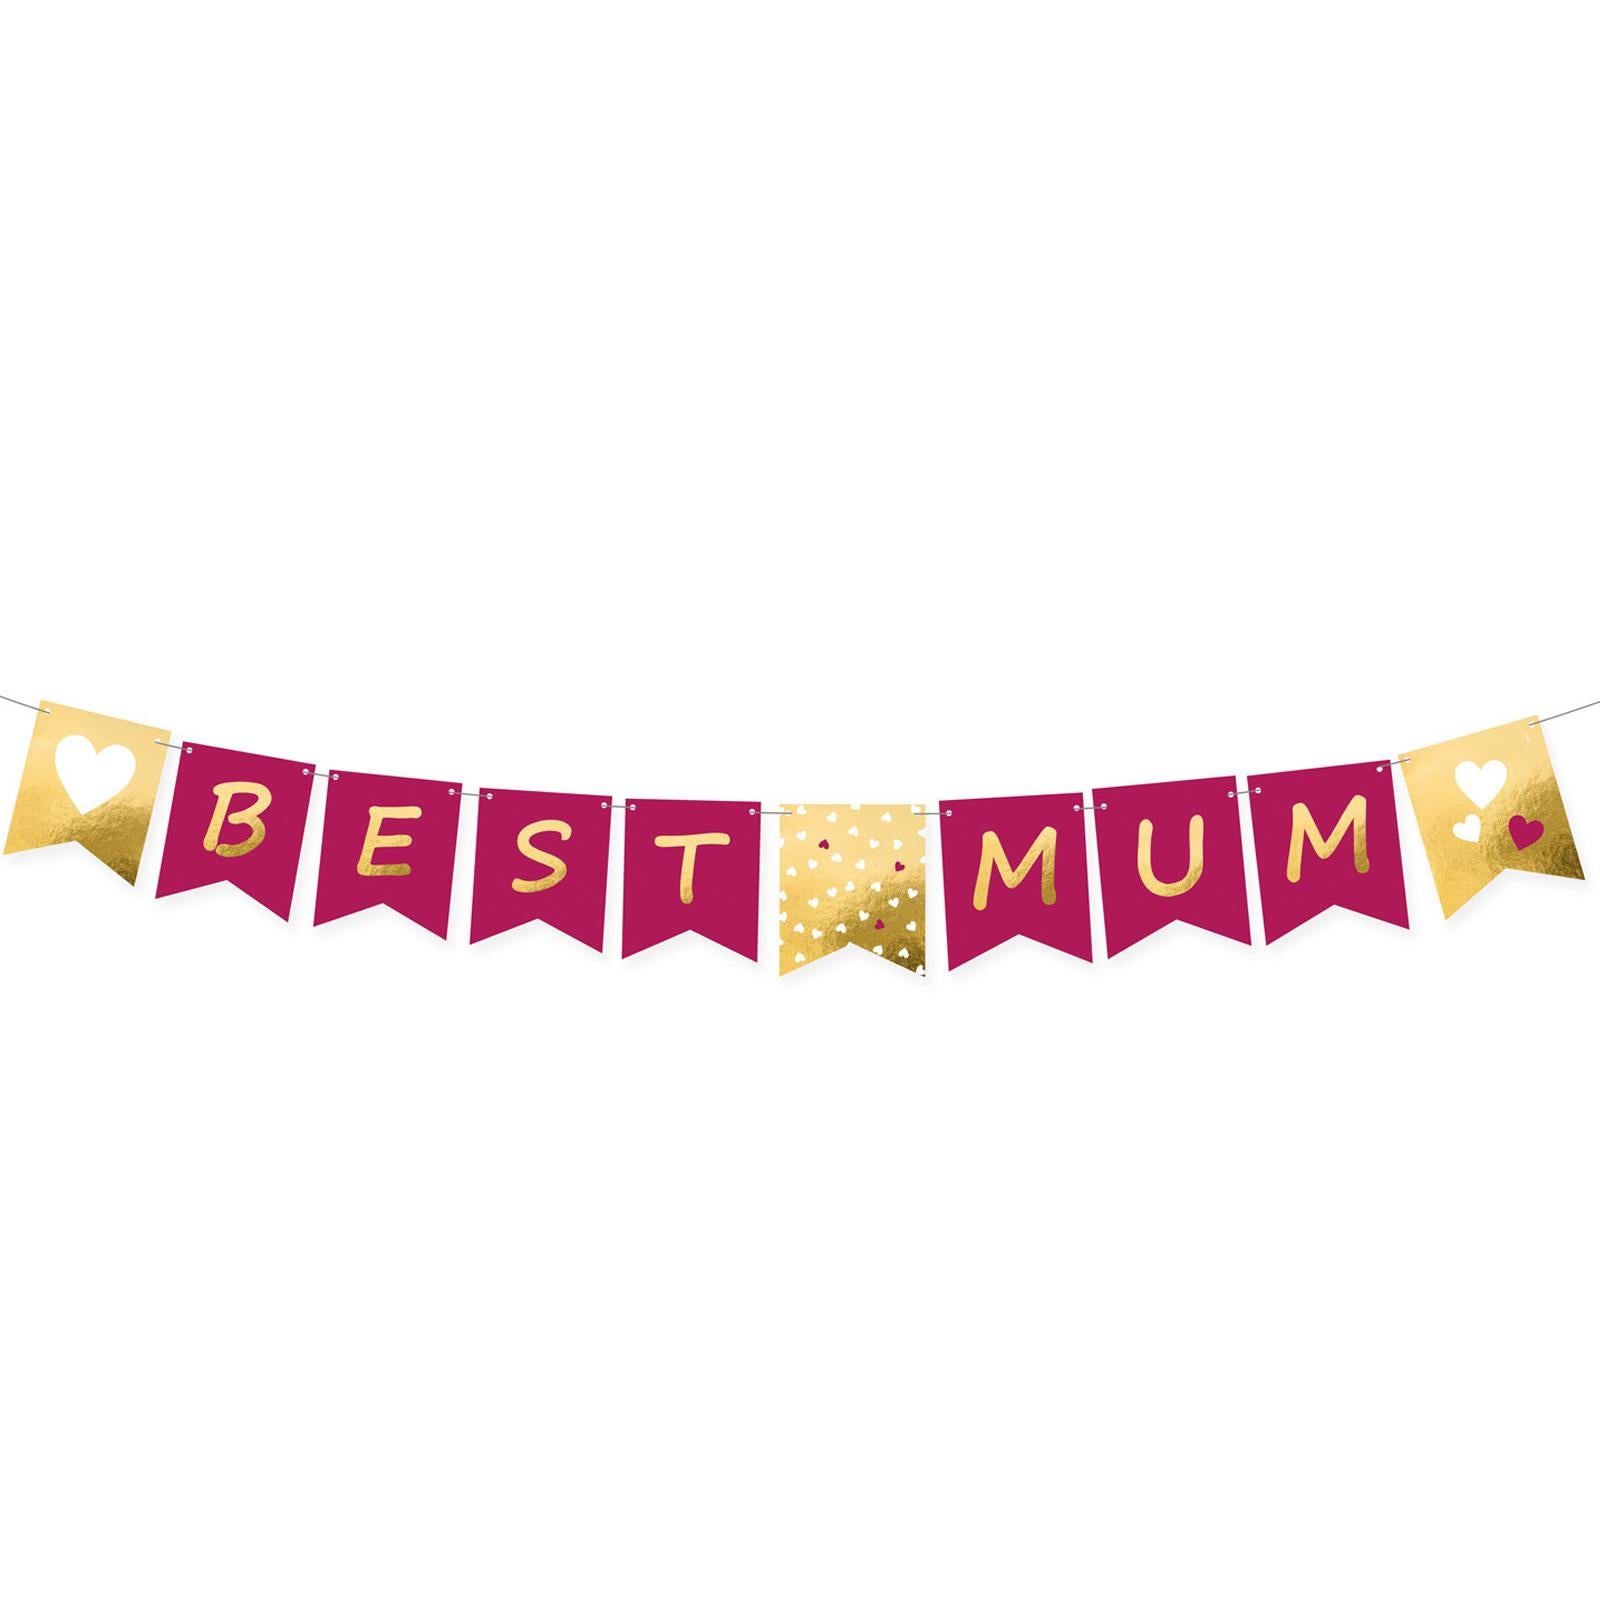 Best Mom Letter Banner Decorations - Party Centre